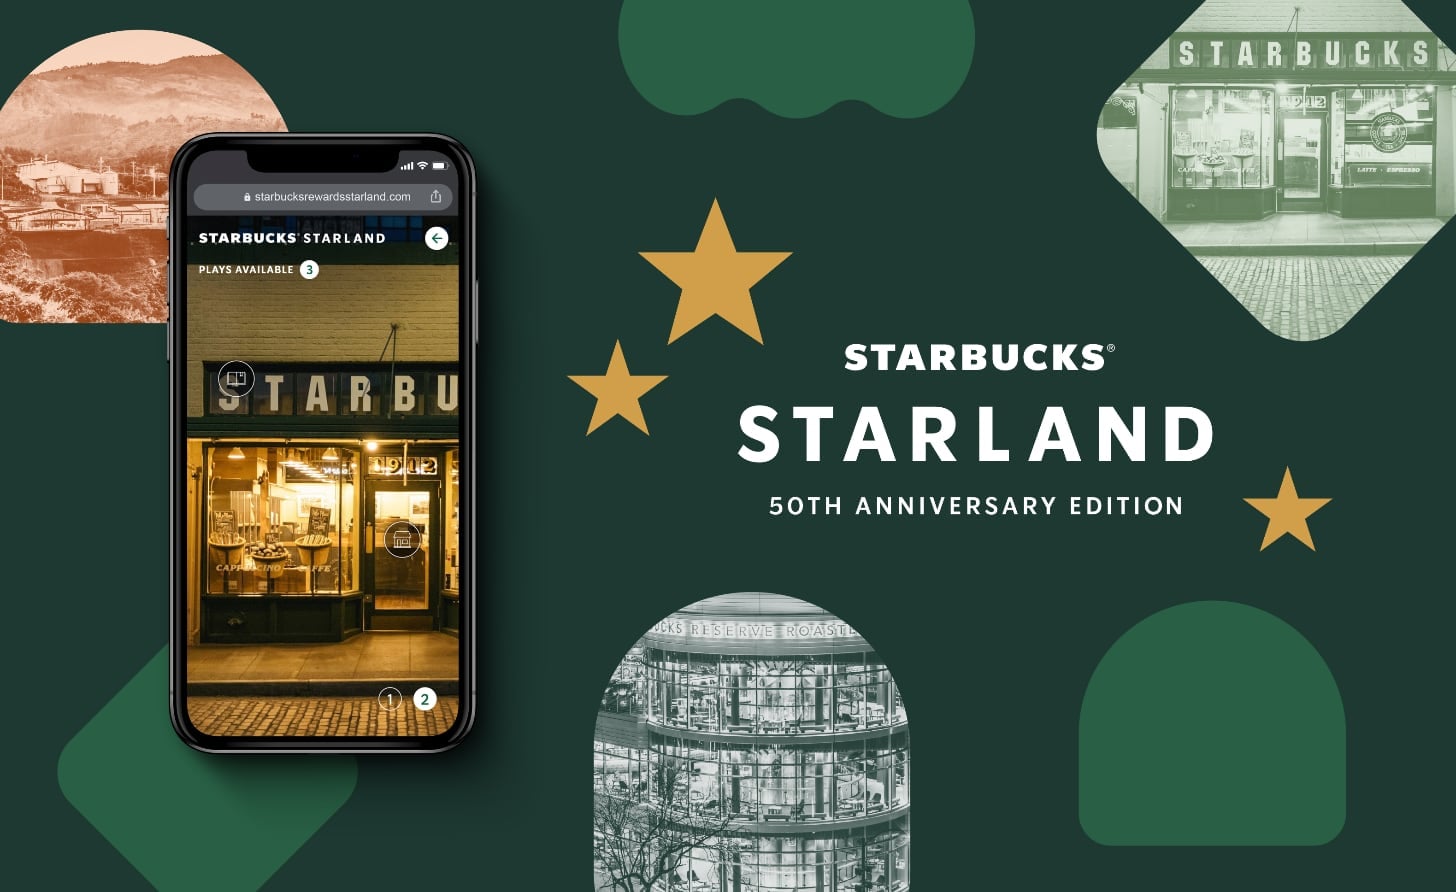 How to Play Starbucks's Starland Game 2021 POPSUGAR Food